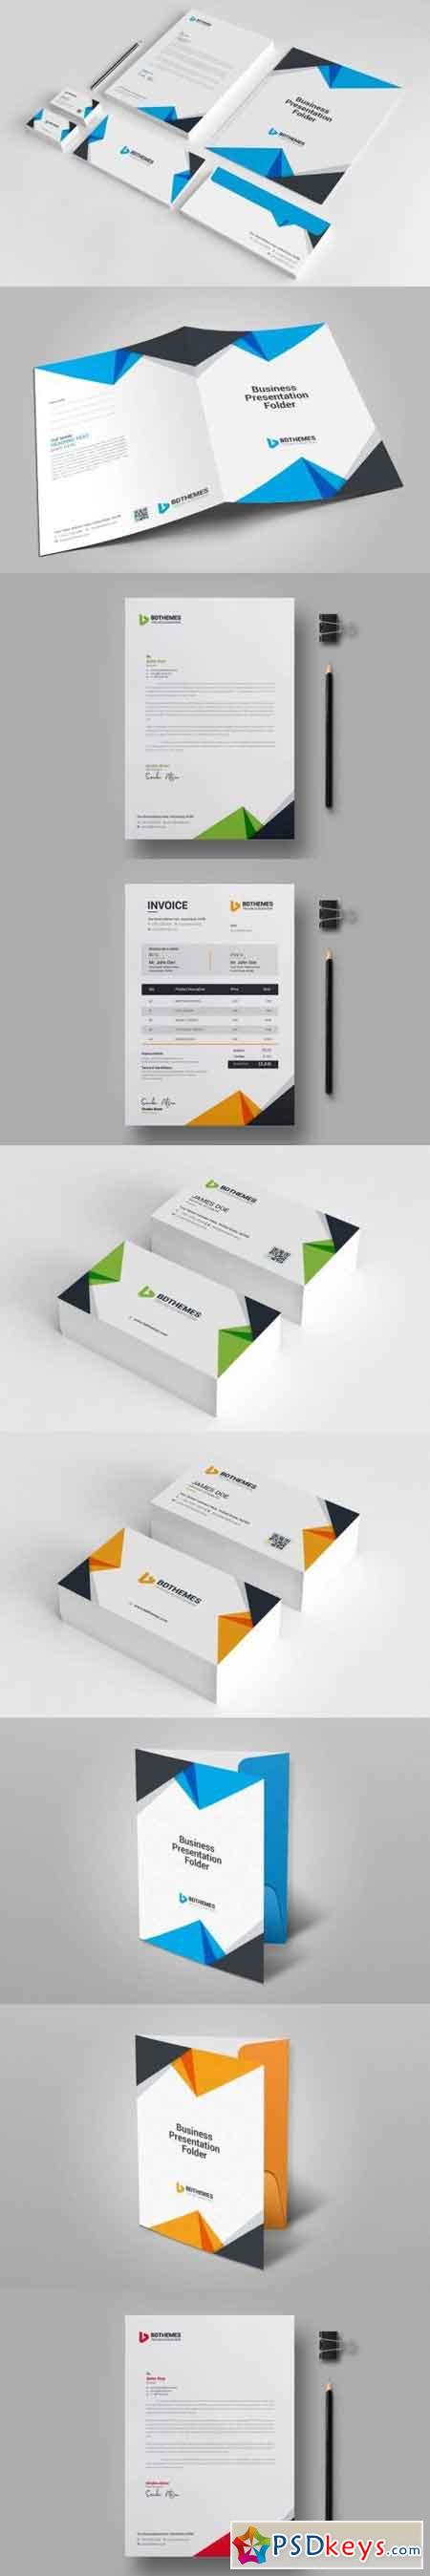 Business Stationery Template 09